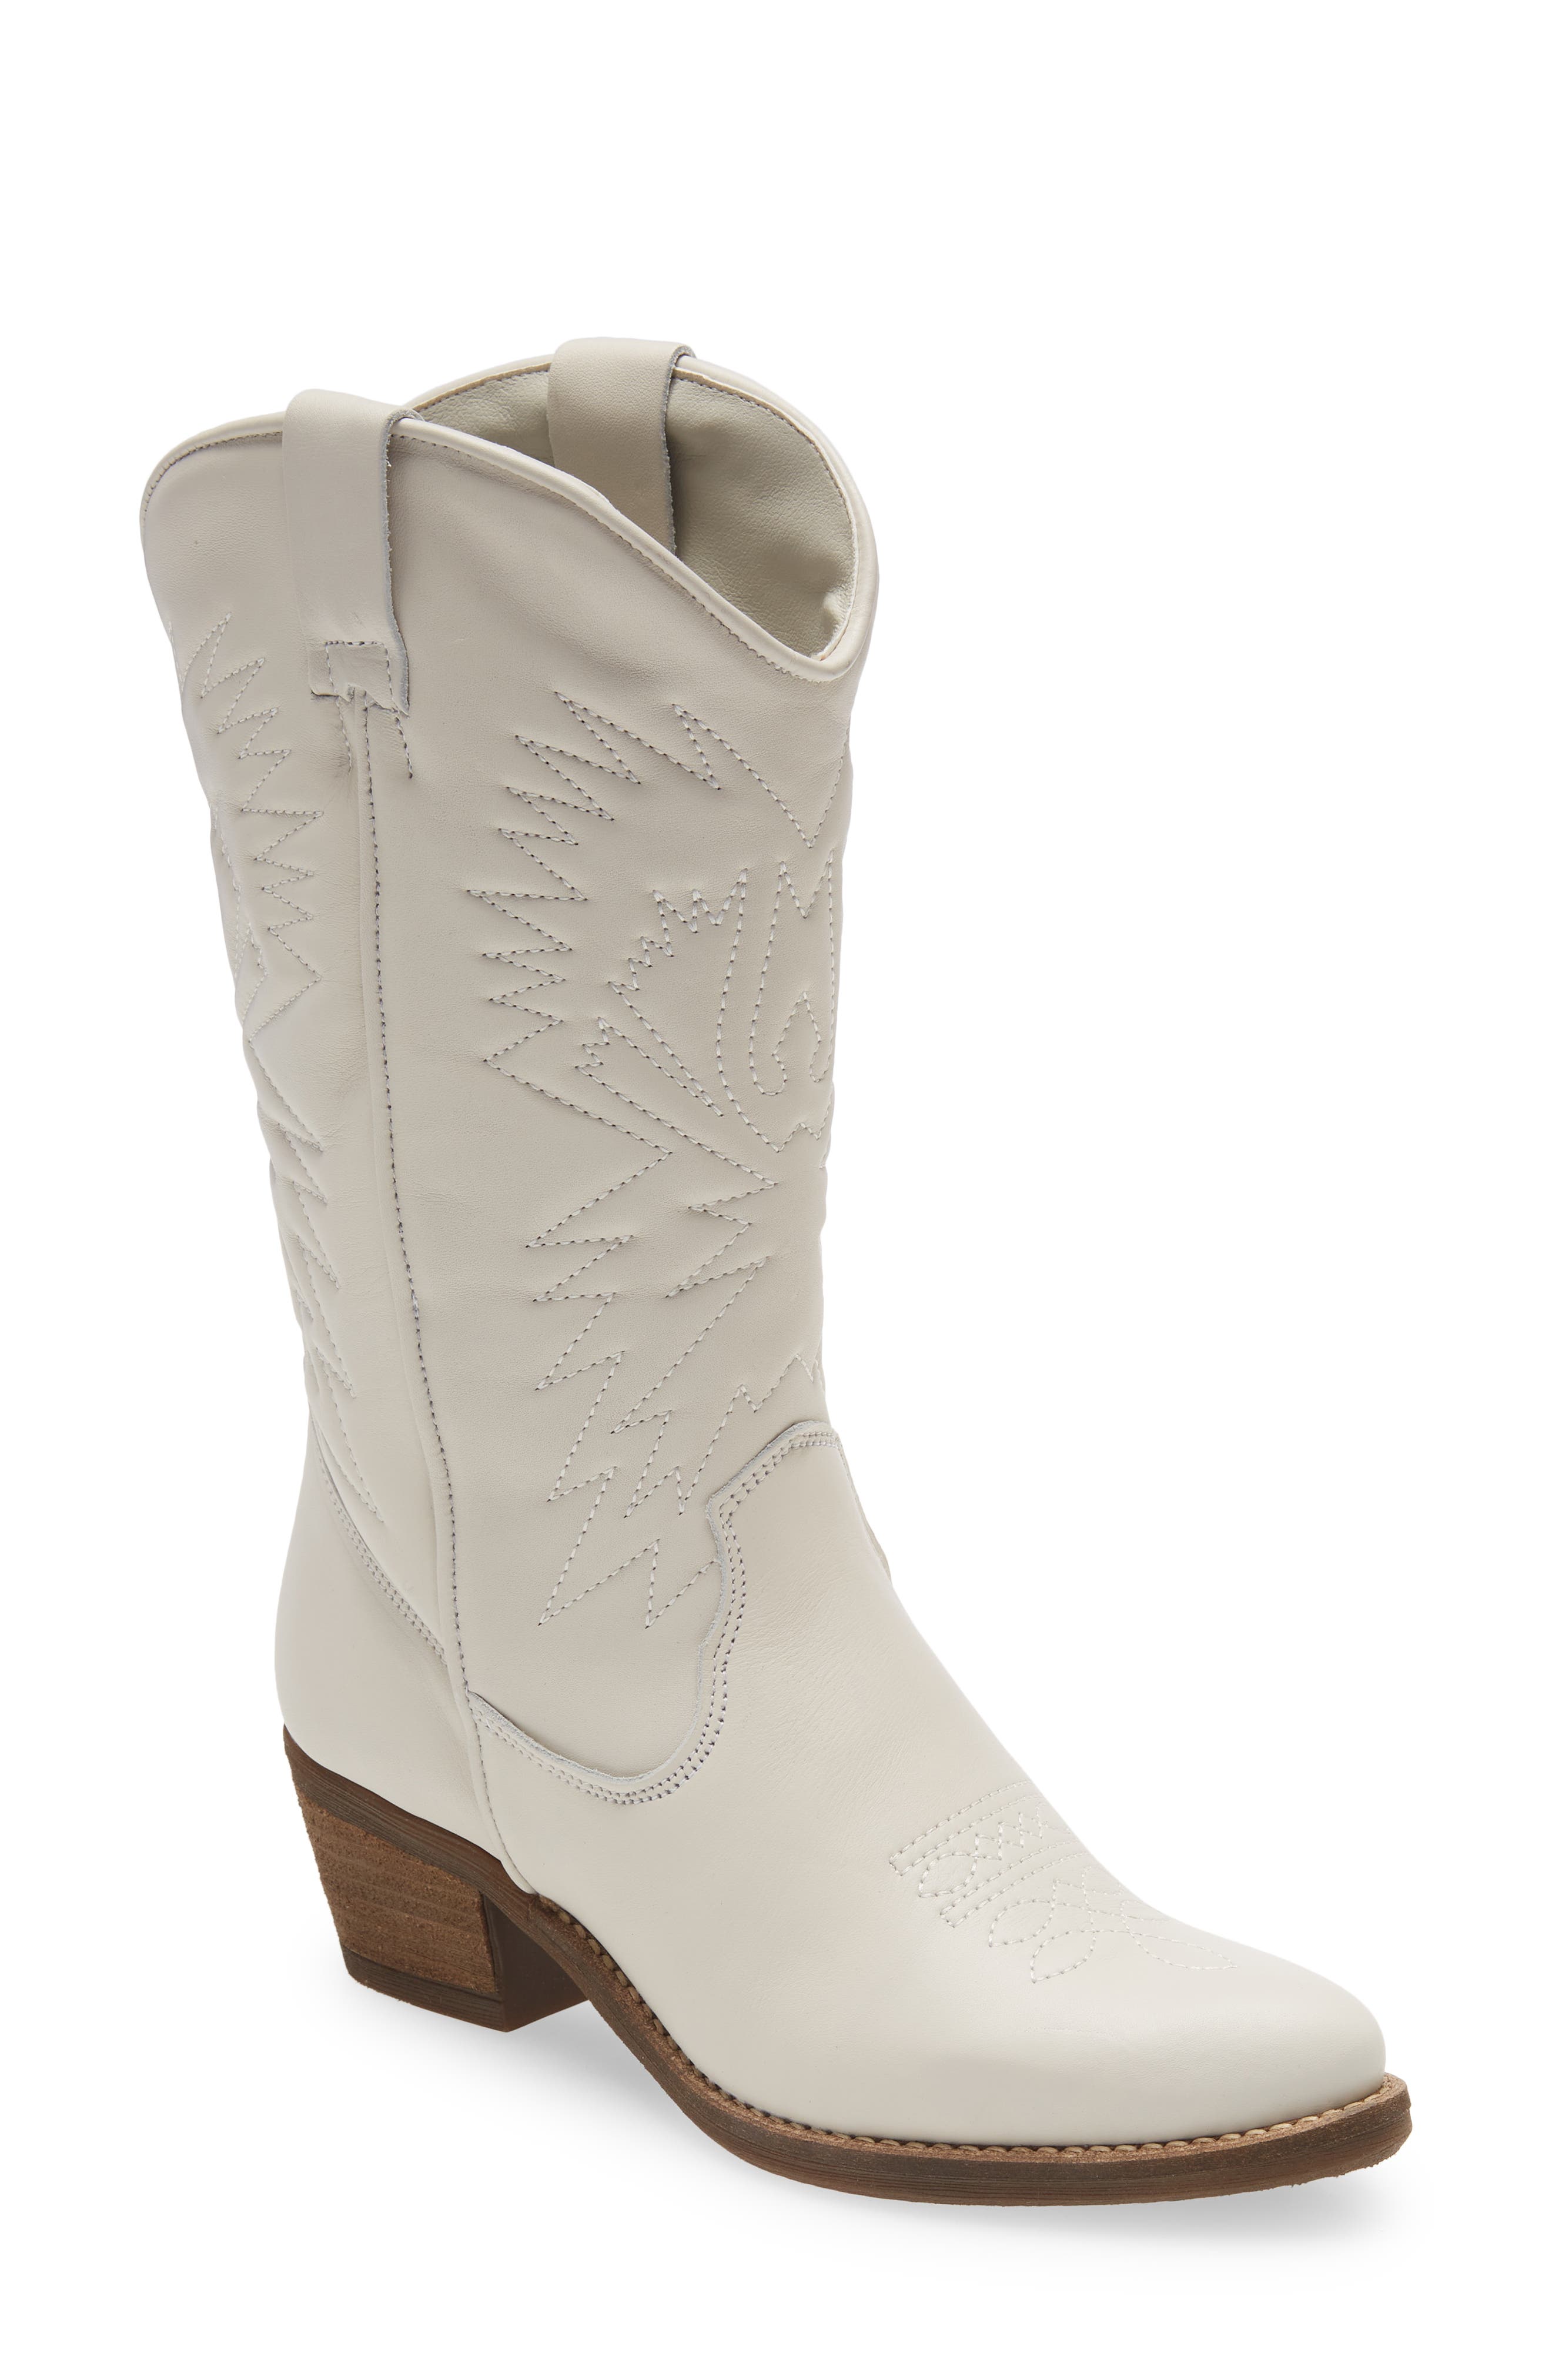 Brand New in Box Durango Women's White Leather Western Boots 